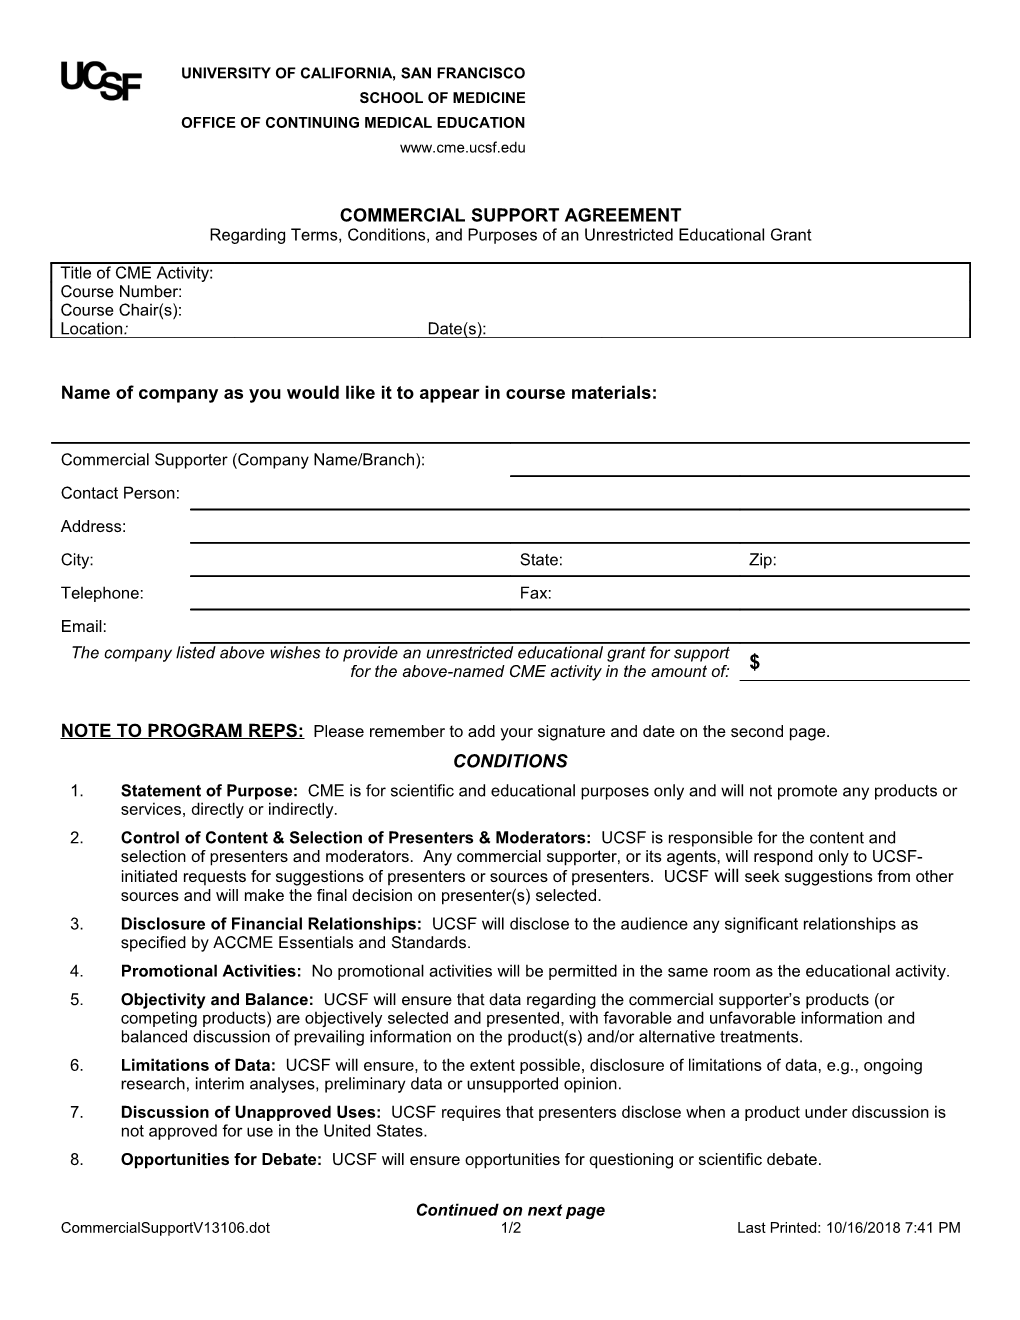 Commercial Support Agreement